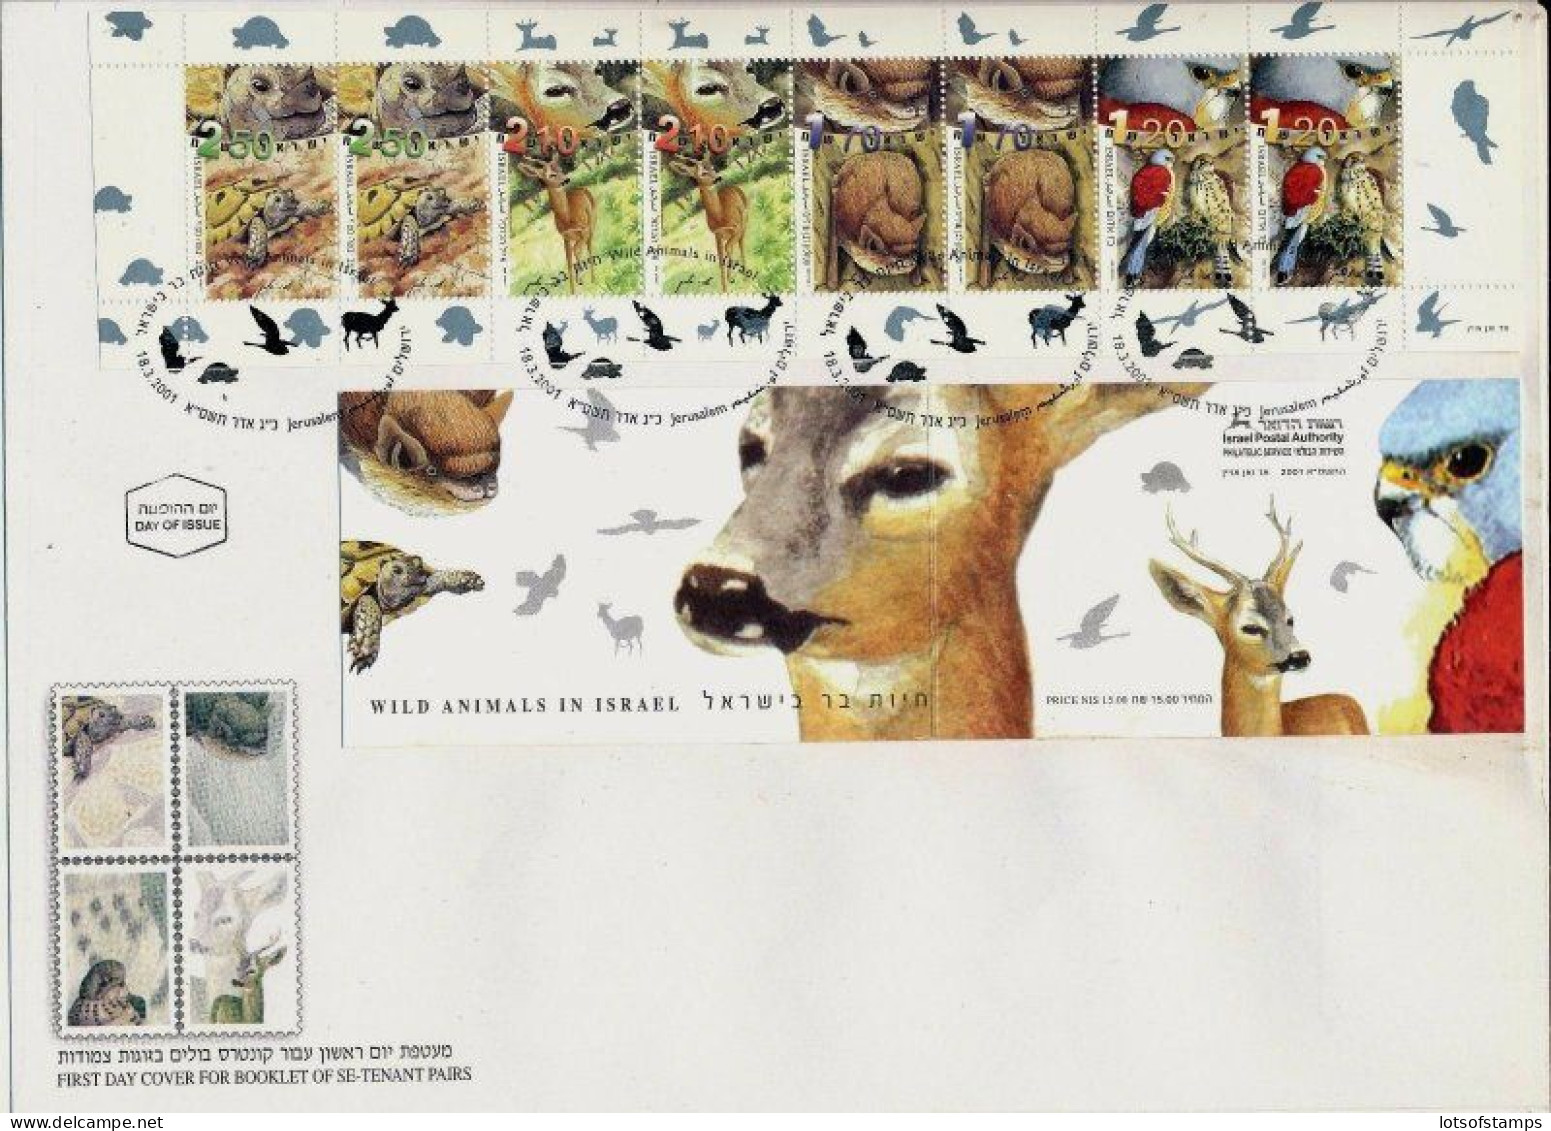 ISRAEL 2001 WILD ANIMALS BOOKLET FDC - Covers & Documents